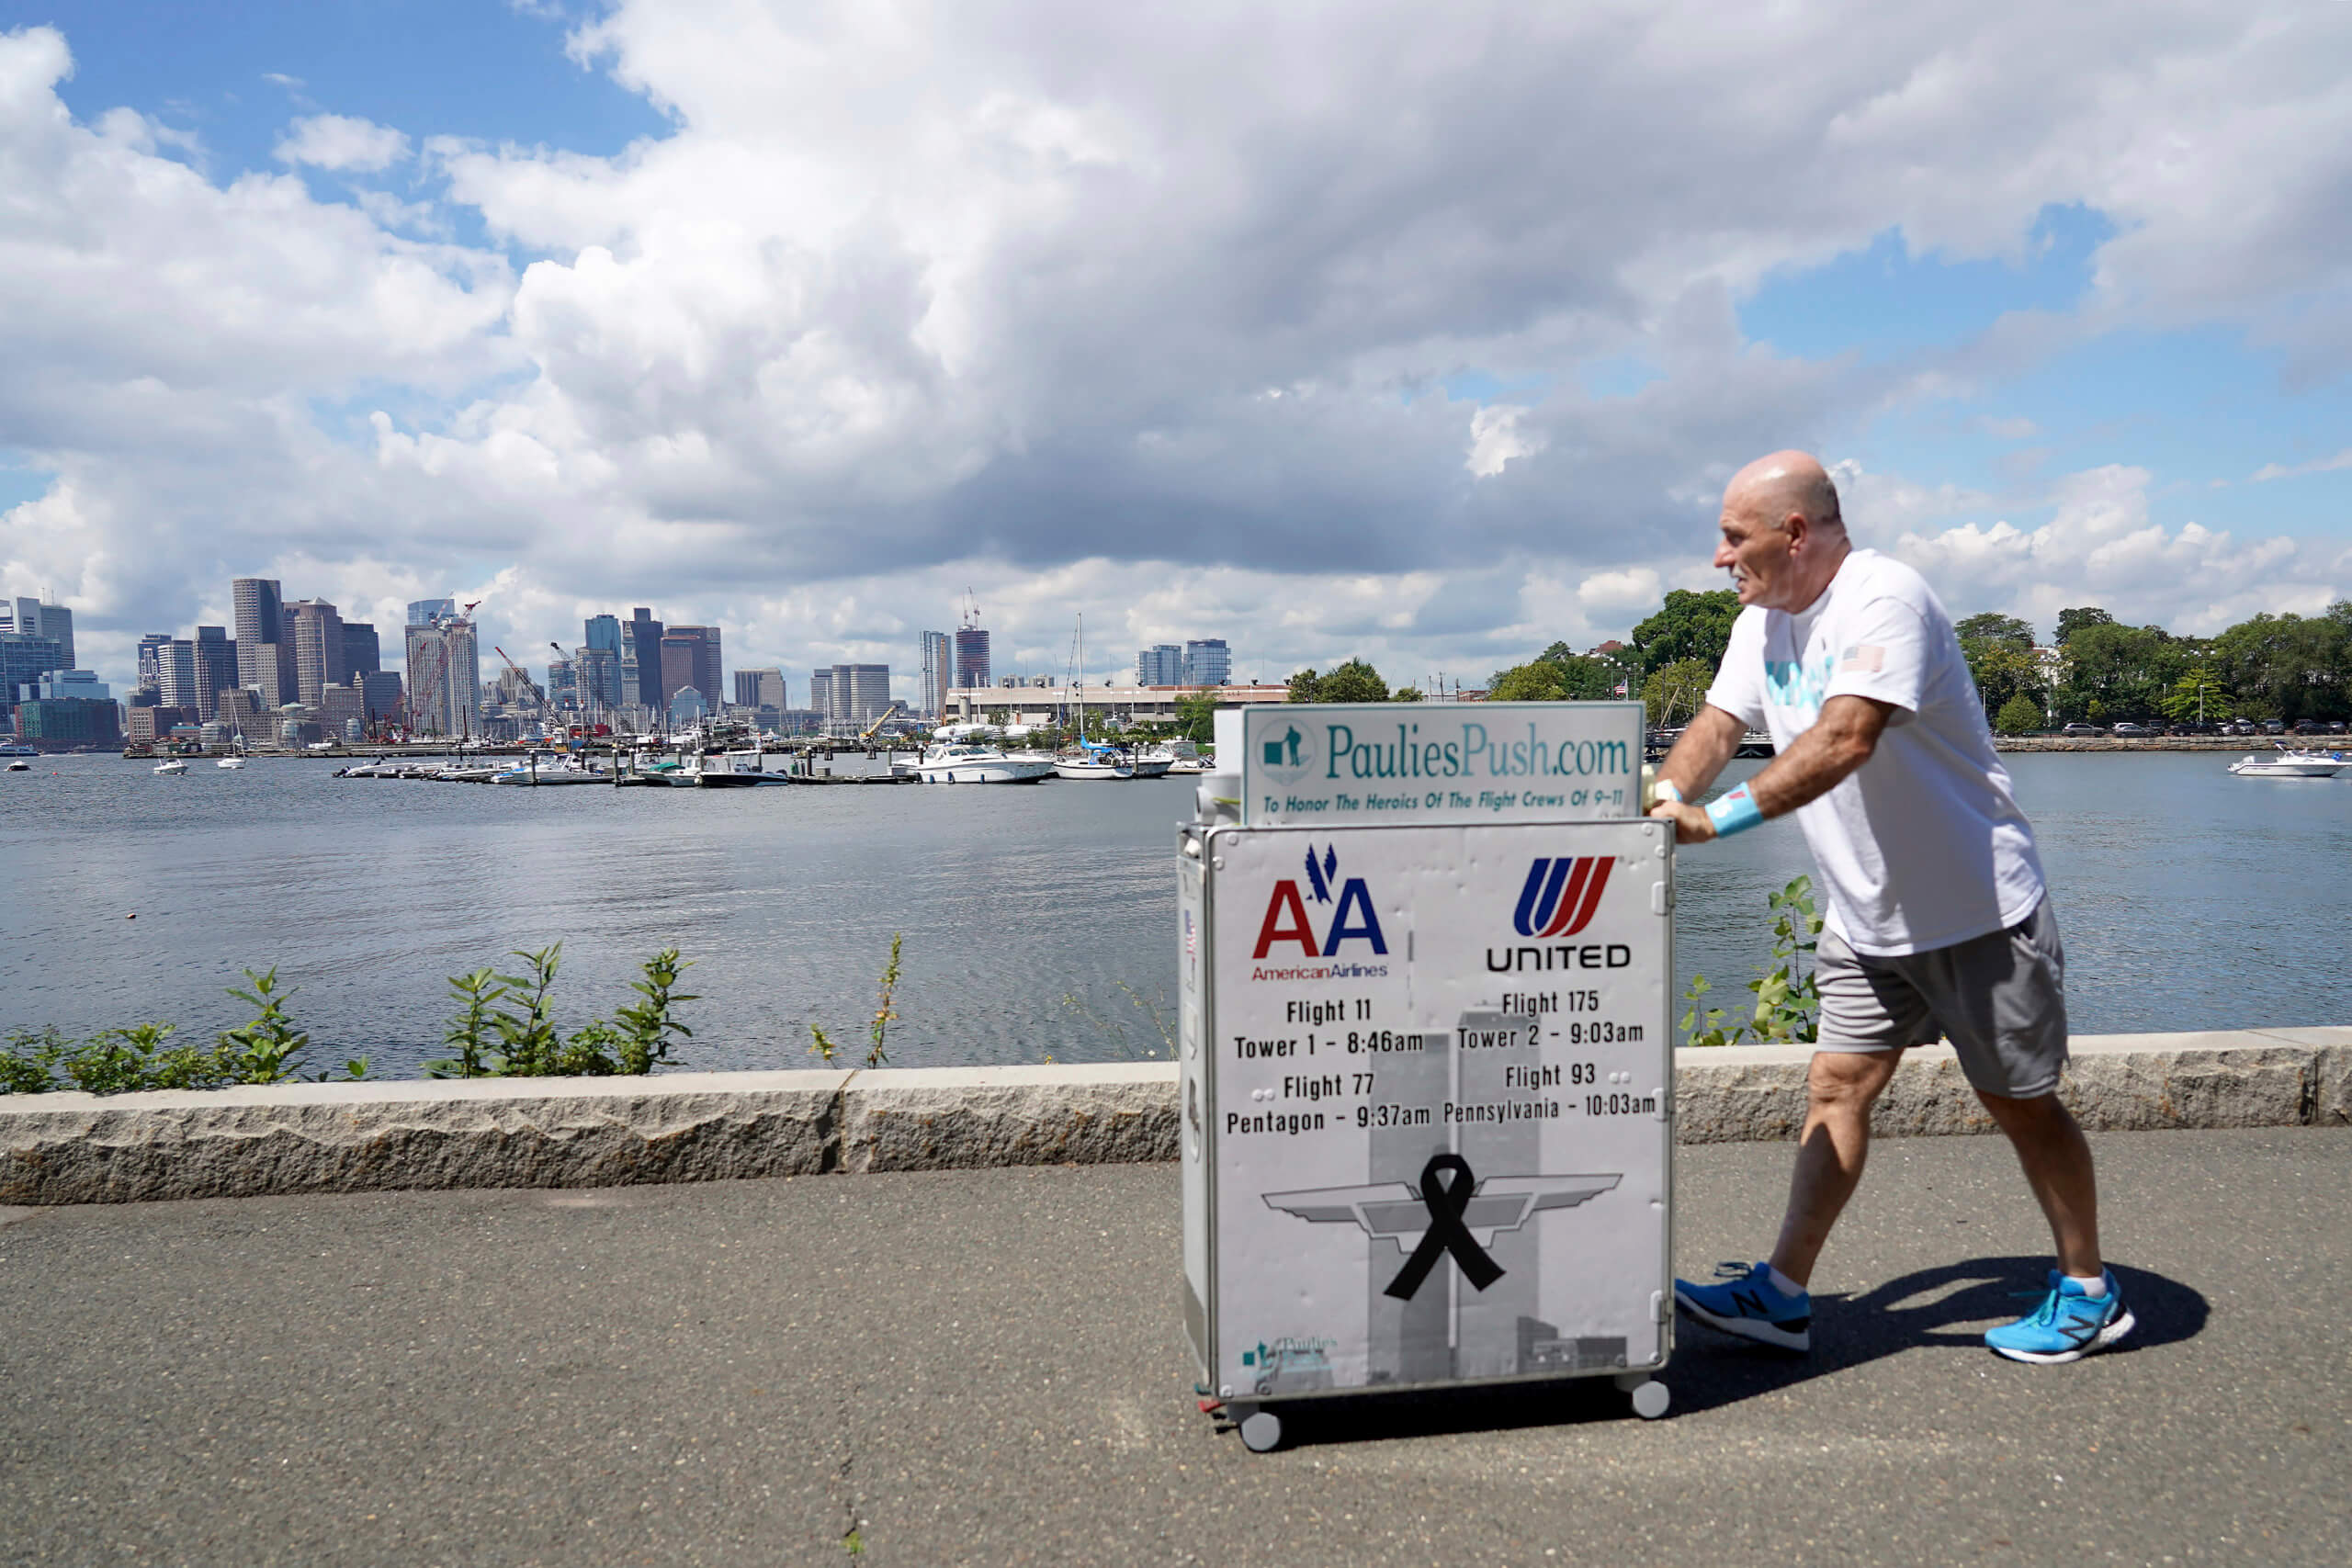 Paul Veneto pushes a beverage cart along the Boston harbor, Saturday, Aug. 21, 2021. Veneto, a former flight attendant who lost several colleagues when United Flight 175 was flown into the World Trade Center on Sept. 11, 2001, is honoring his friends on the 20th anniversary of the terrorist attacks by pushing the beverage cart from Boston to ground zero in New York. (AP Photo/Mary Schwalm)